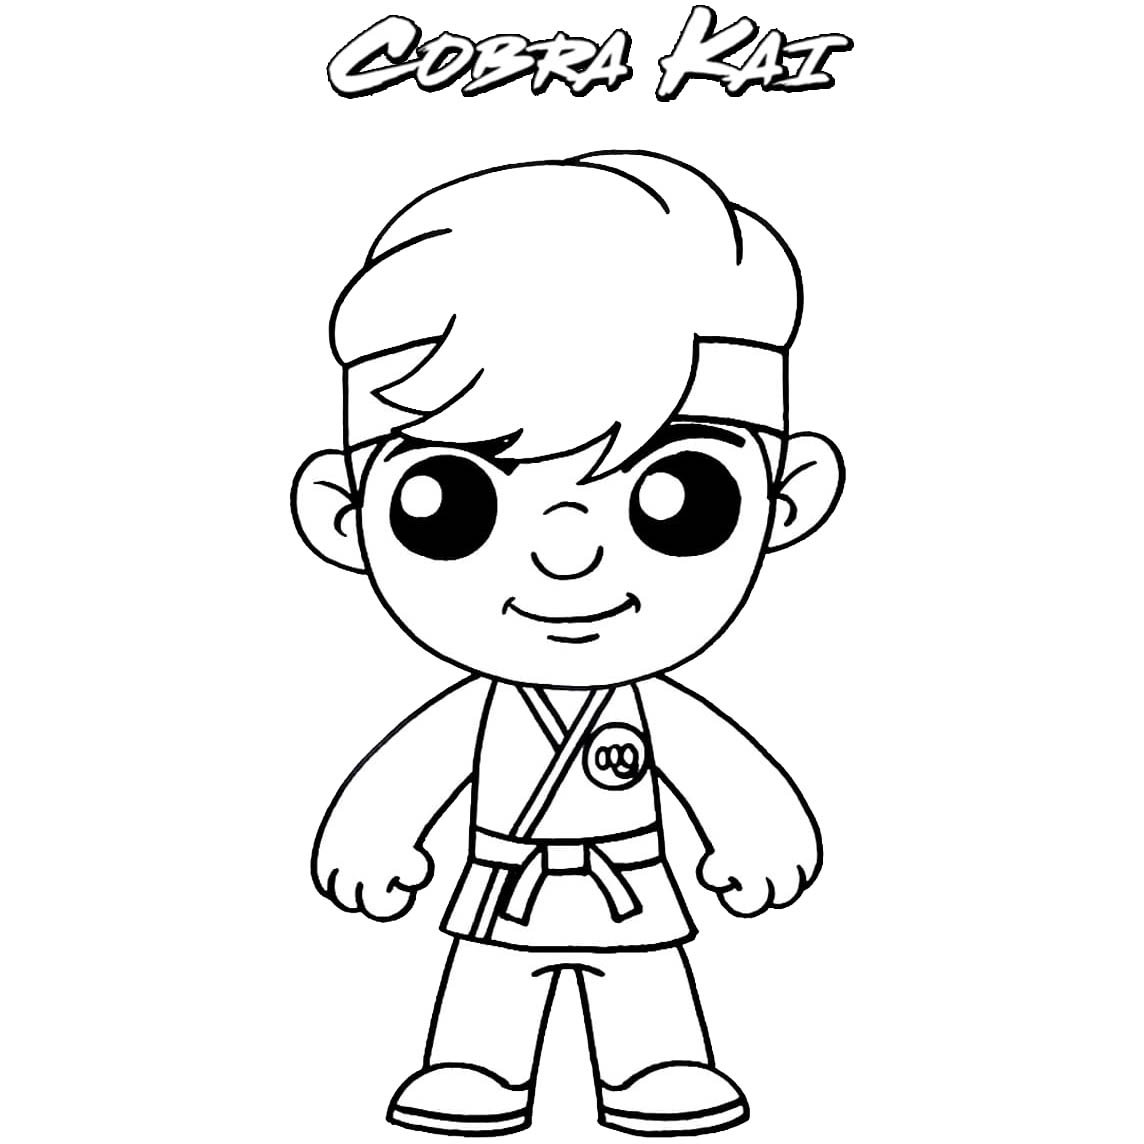 Free Cobra Kai Coloring Pages Johnny Lawrence printable